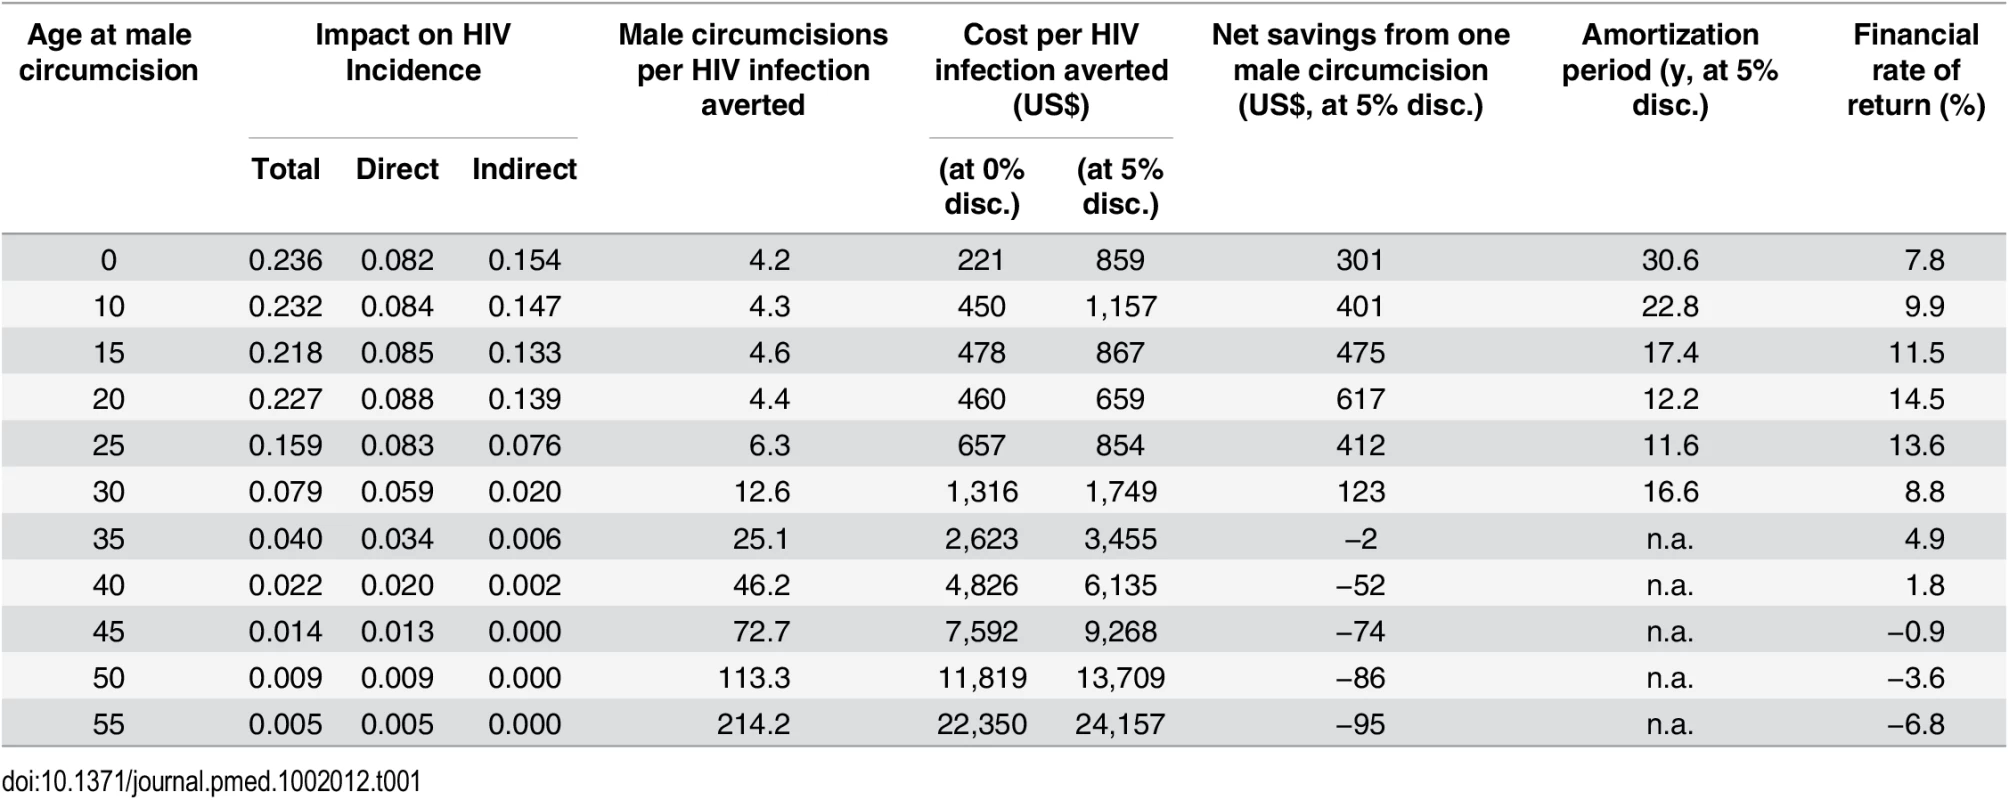 Summary of results (based on one male circumcision performed in South Africa in 2013).